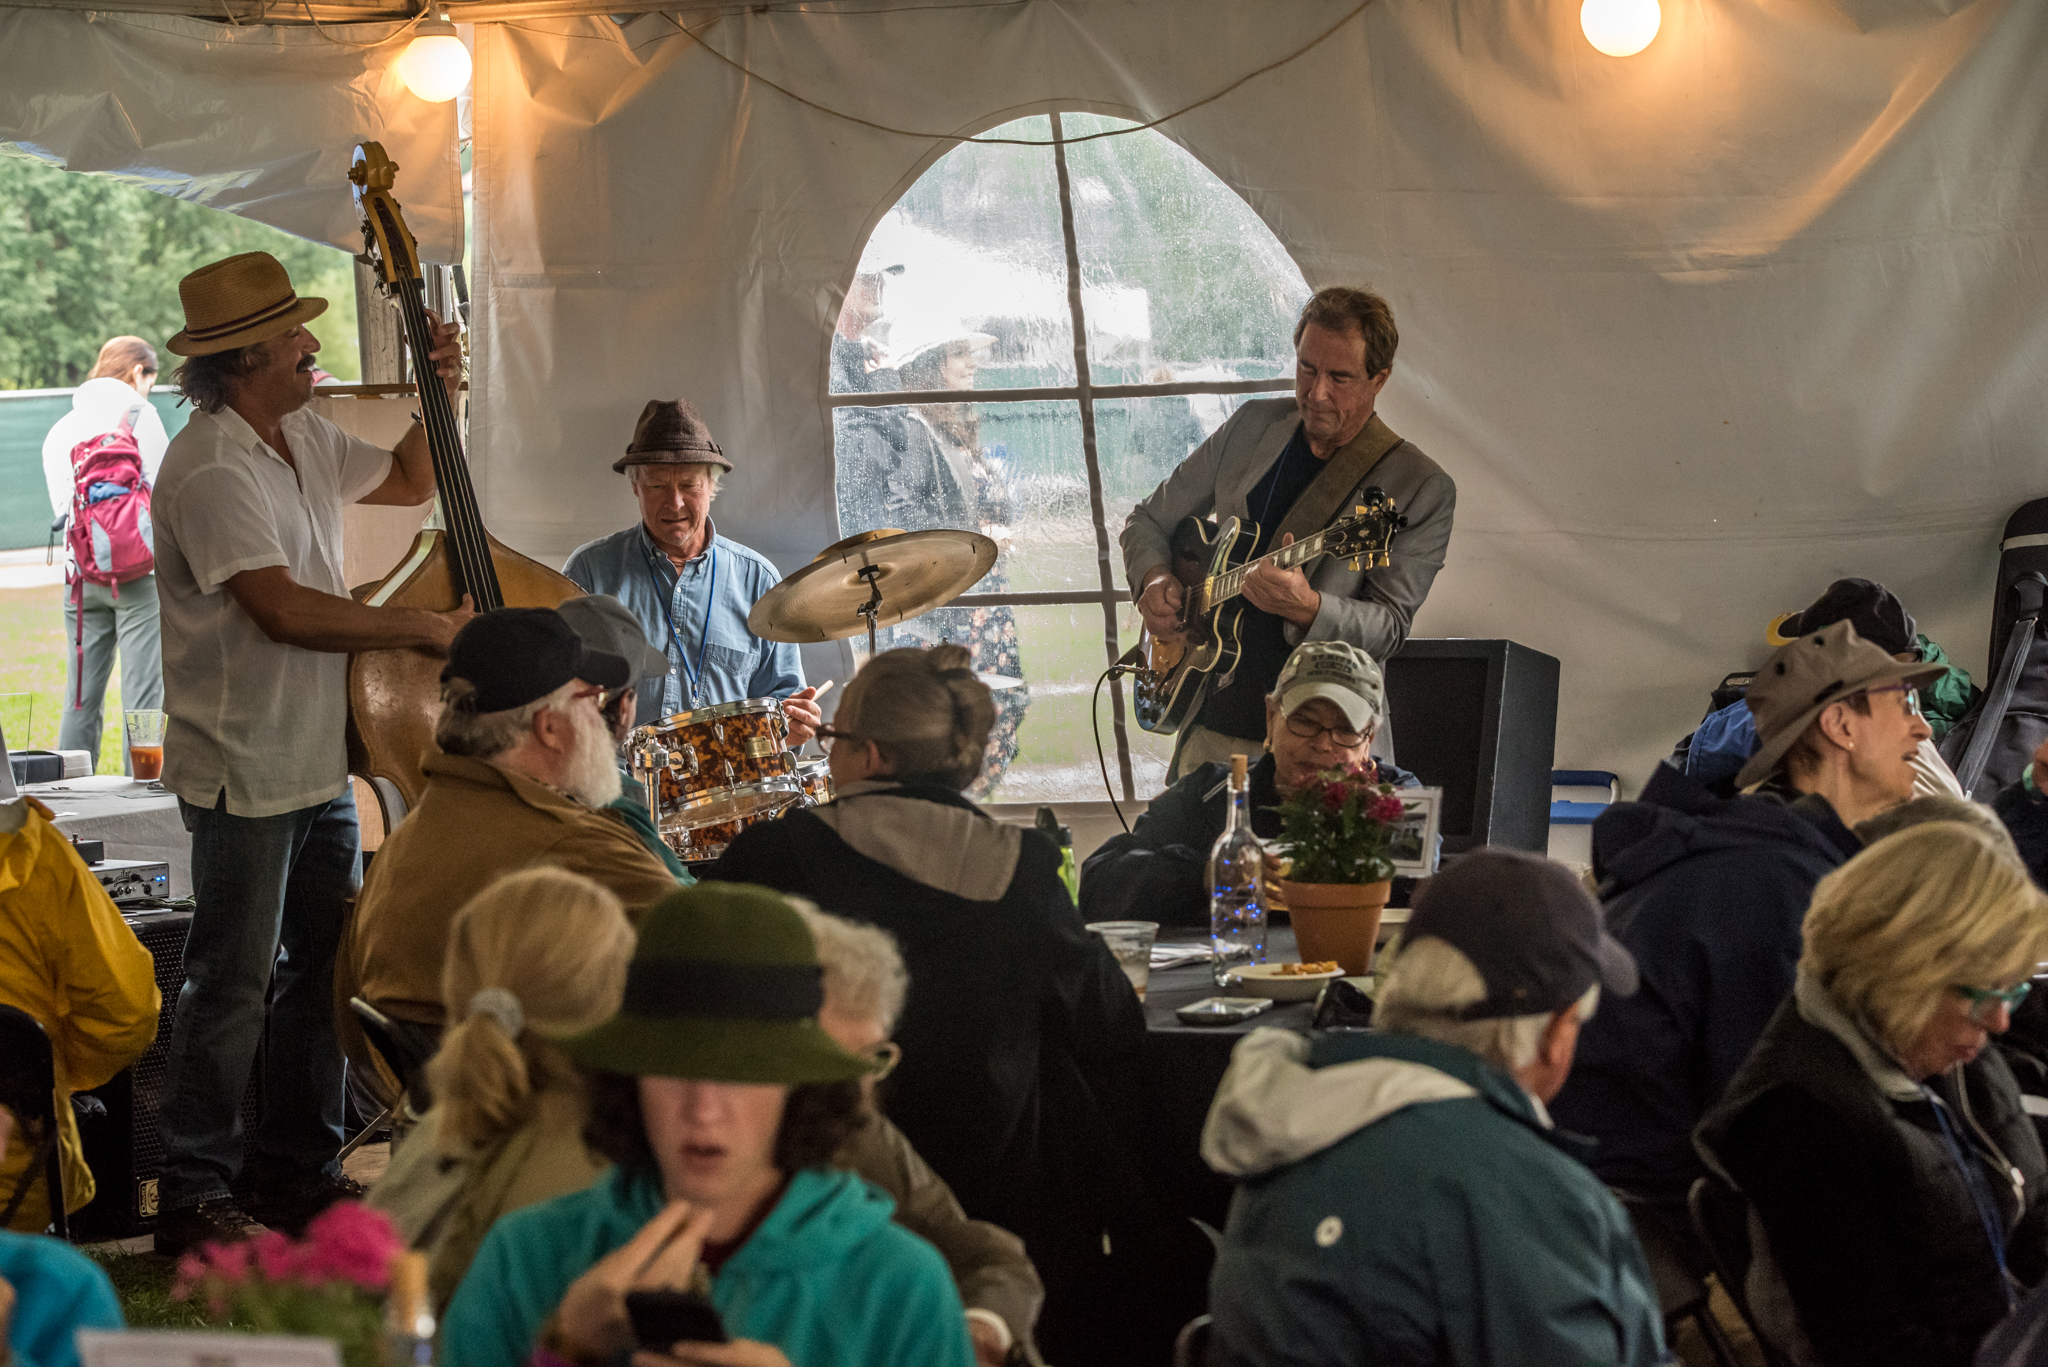   Pop-up Jazz performances between Main Stage acts are one of the many amenities&nbsp; the Patron/VIP lounge has to offer.&nbsp;&nbsp;  